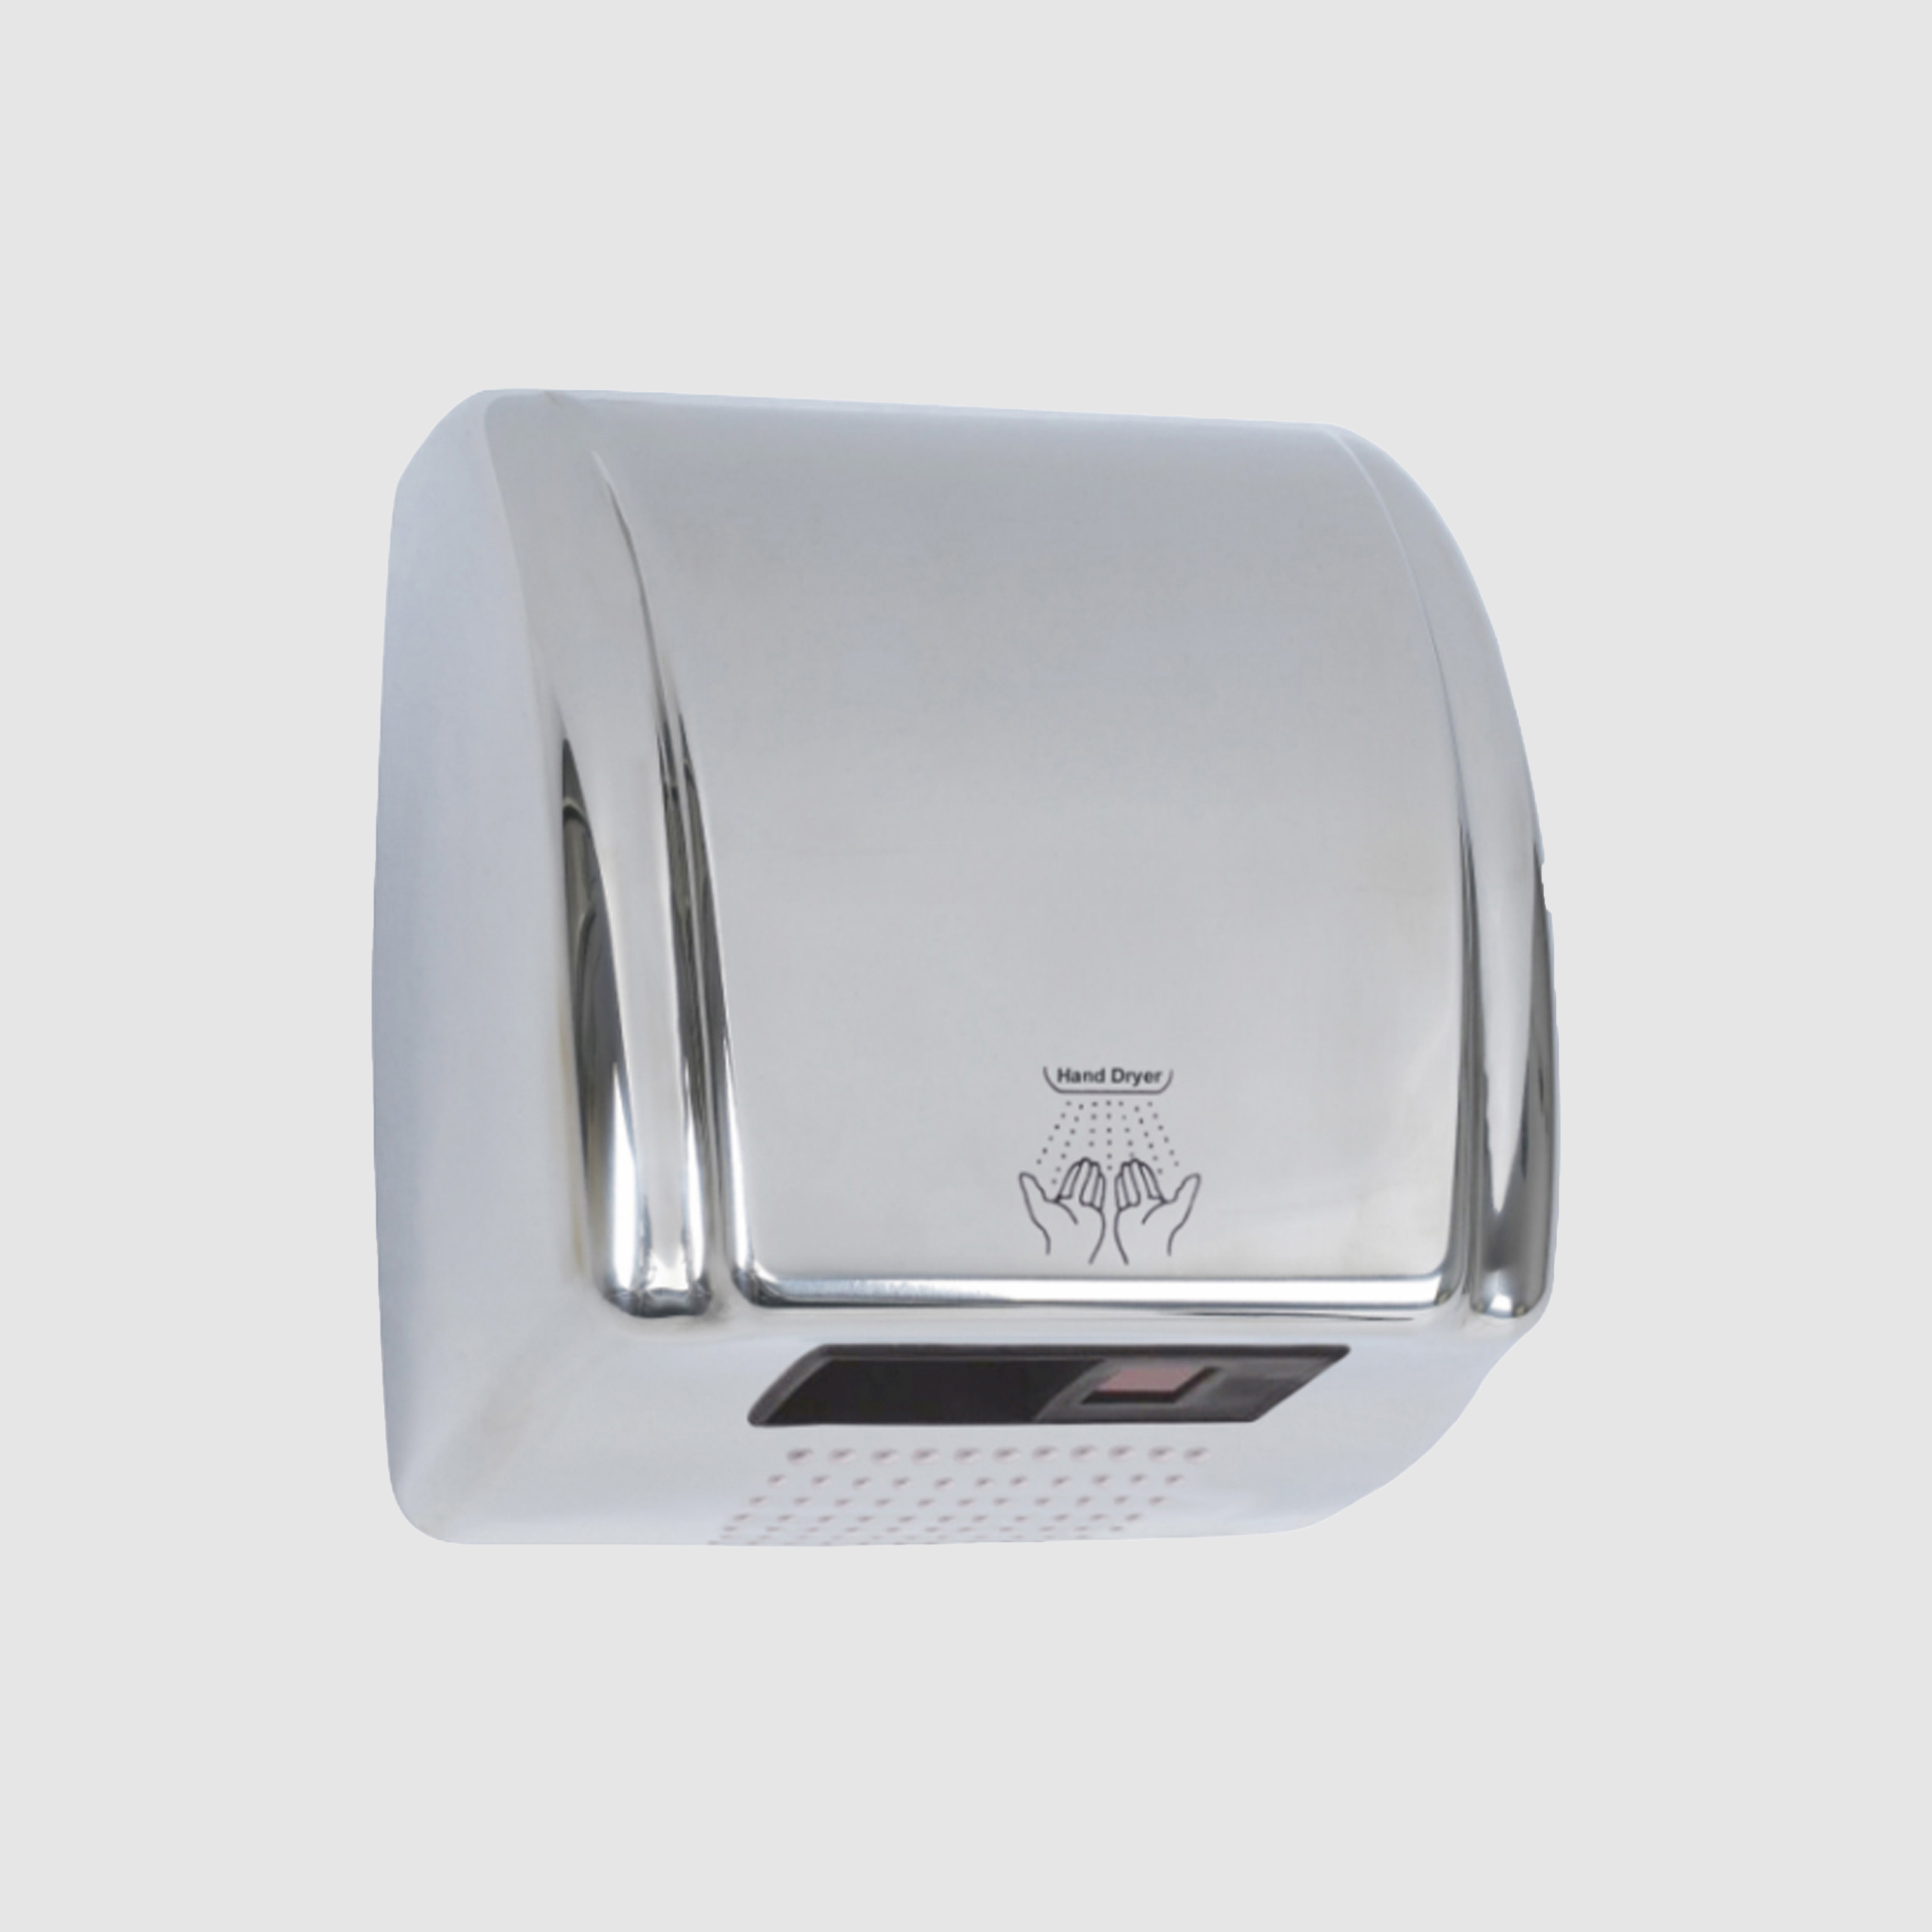 Classical Sensor Operated Stainless Steel Hand Dryer